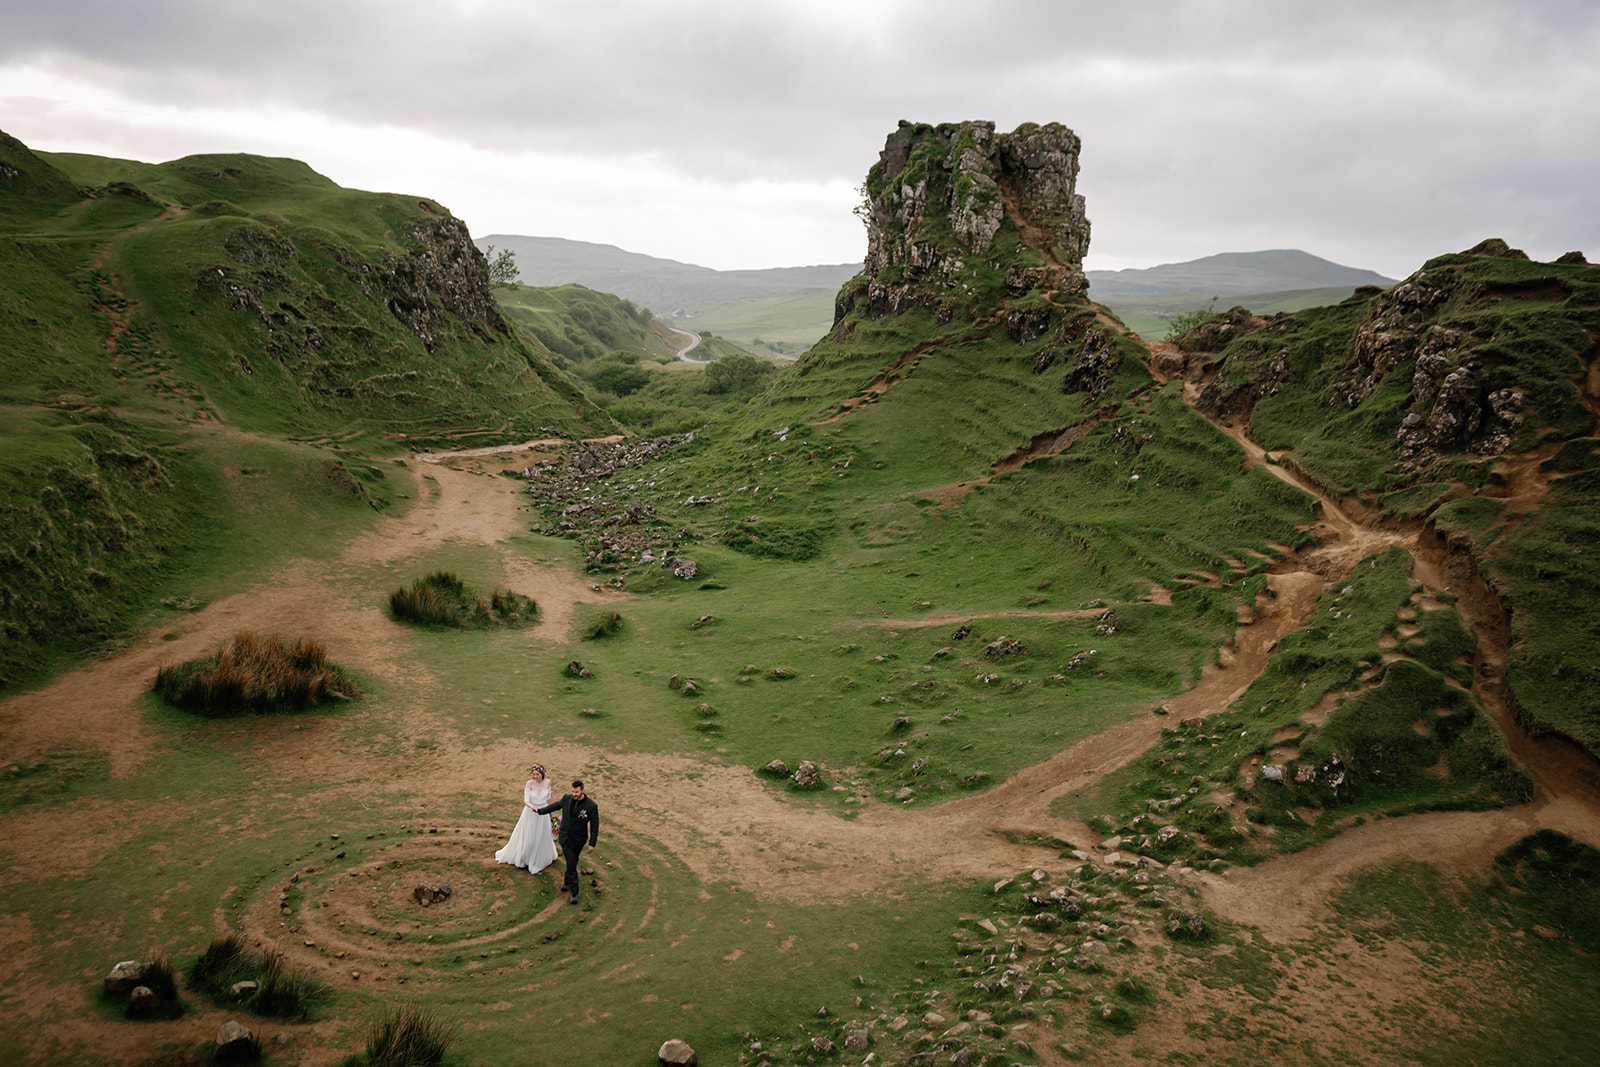 Becca and Nick as they share a tender moment, wrapped in the ethereal beauty of Fairy Glen